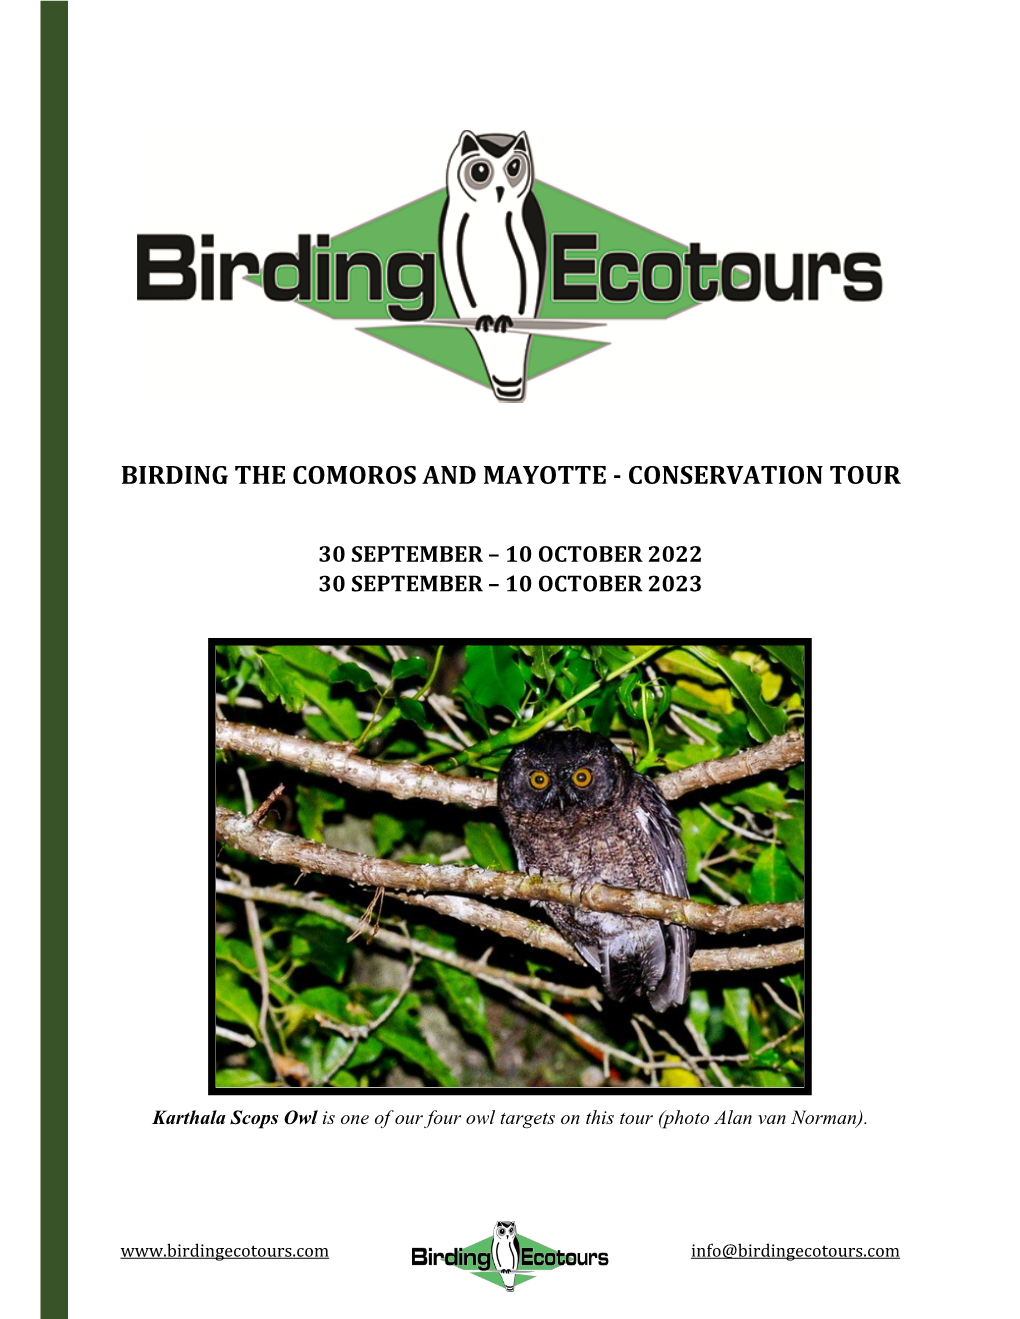 Birding the Comoros and Mayotte - Conservation Tour